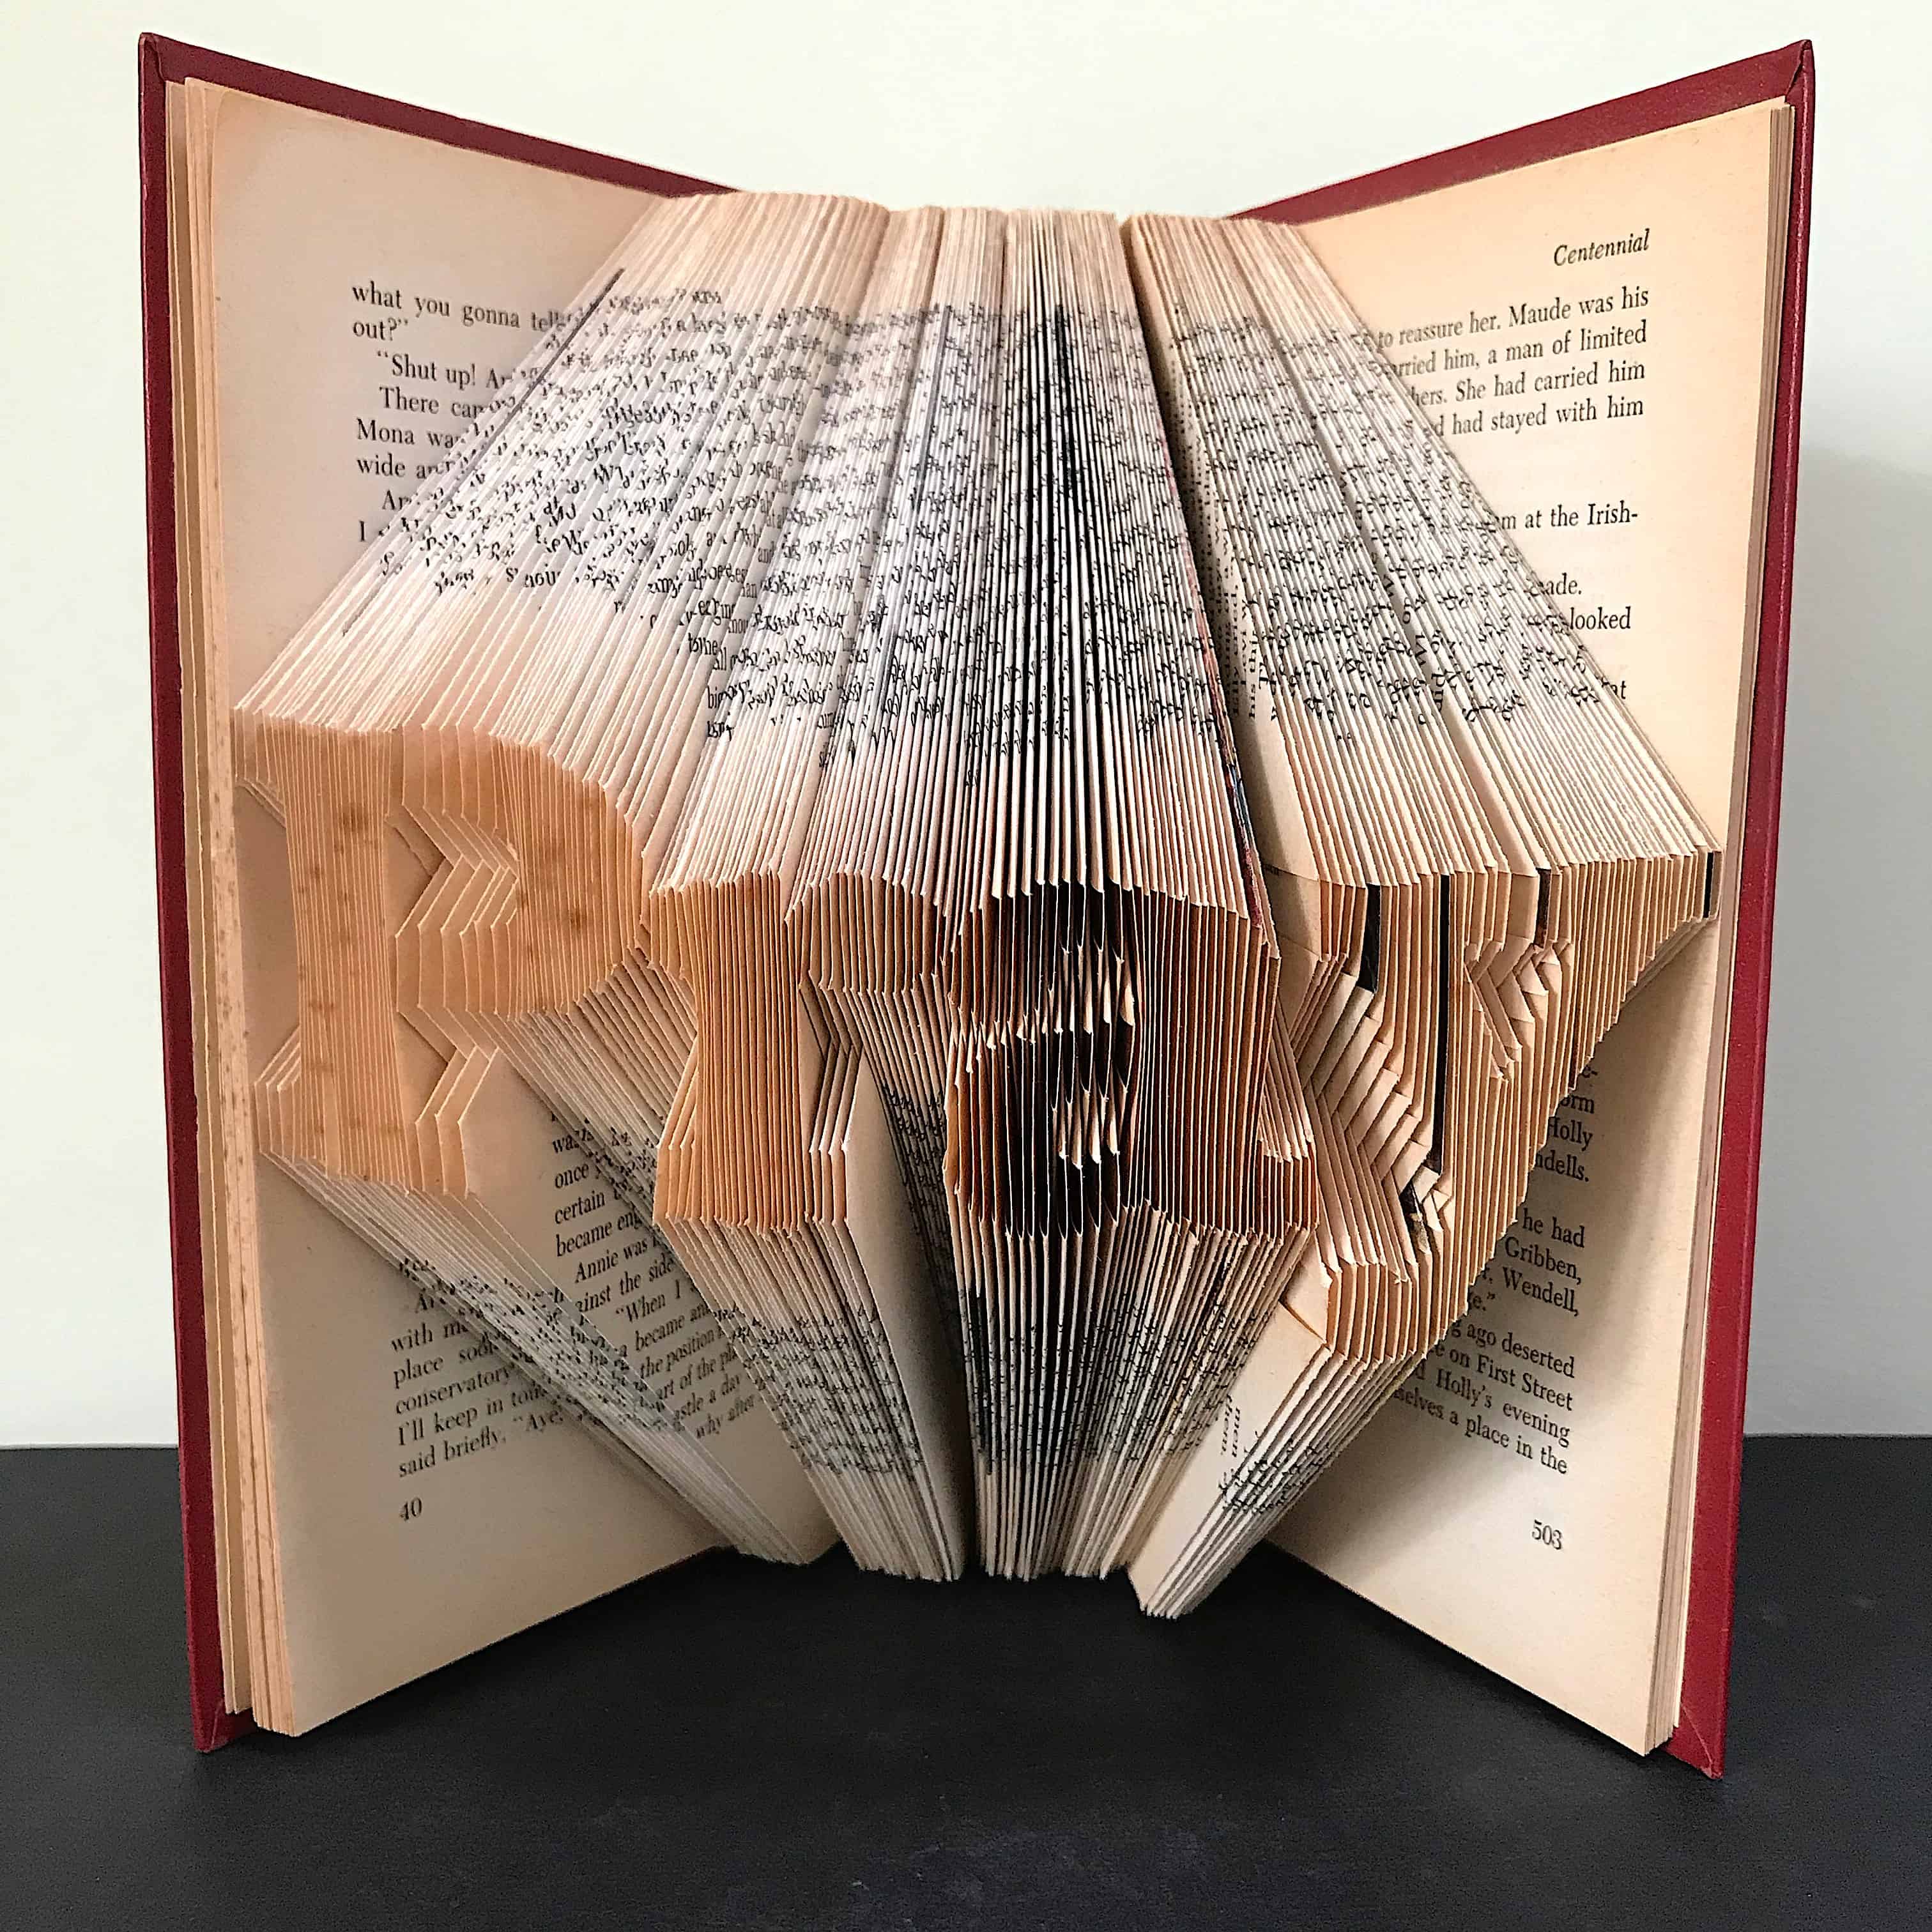 pray-book-folding-pattern-diy-gift-to-make-your-own-folded-book-art